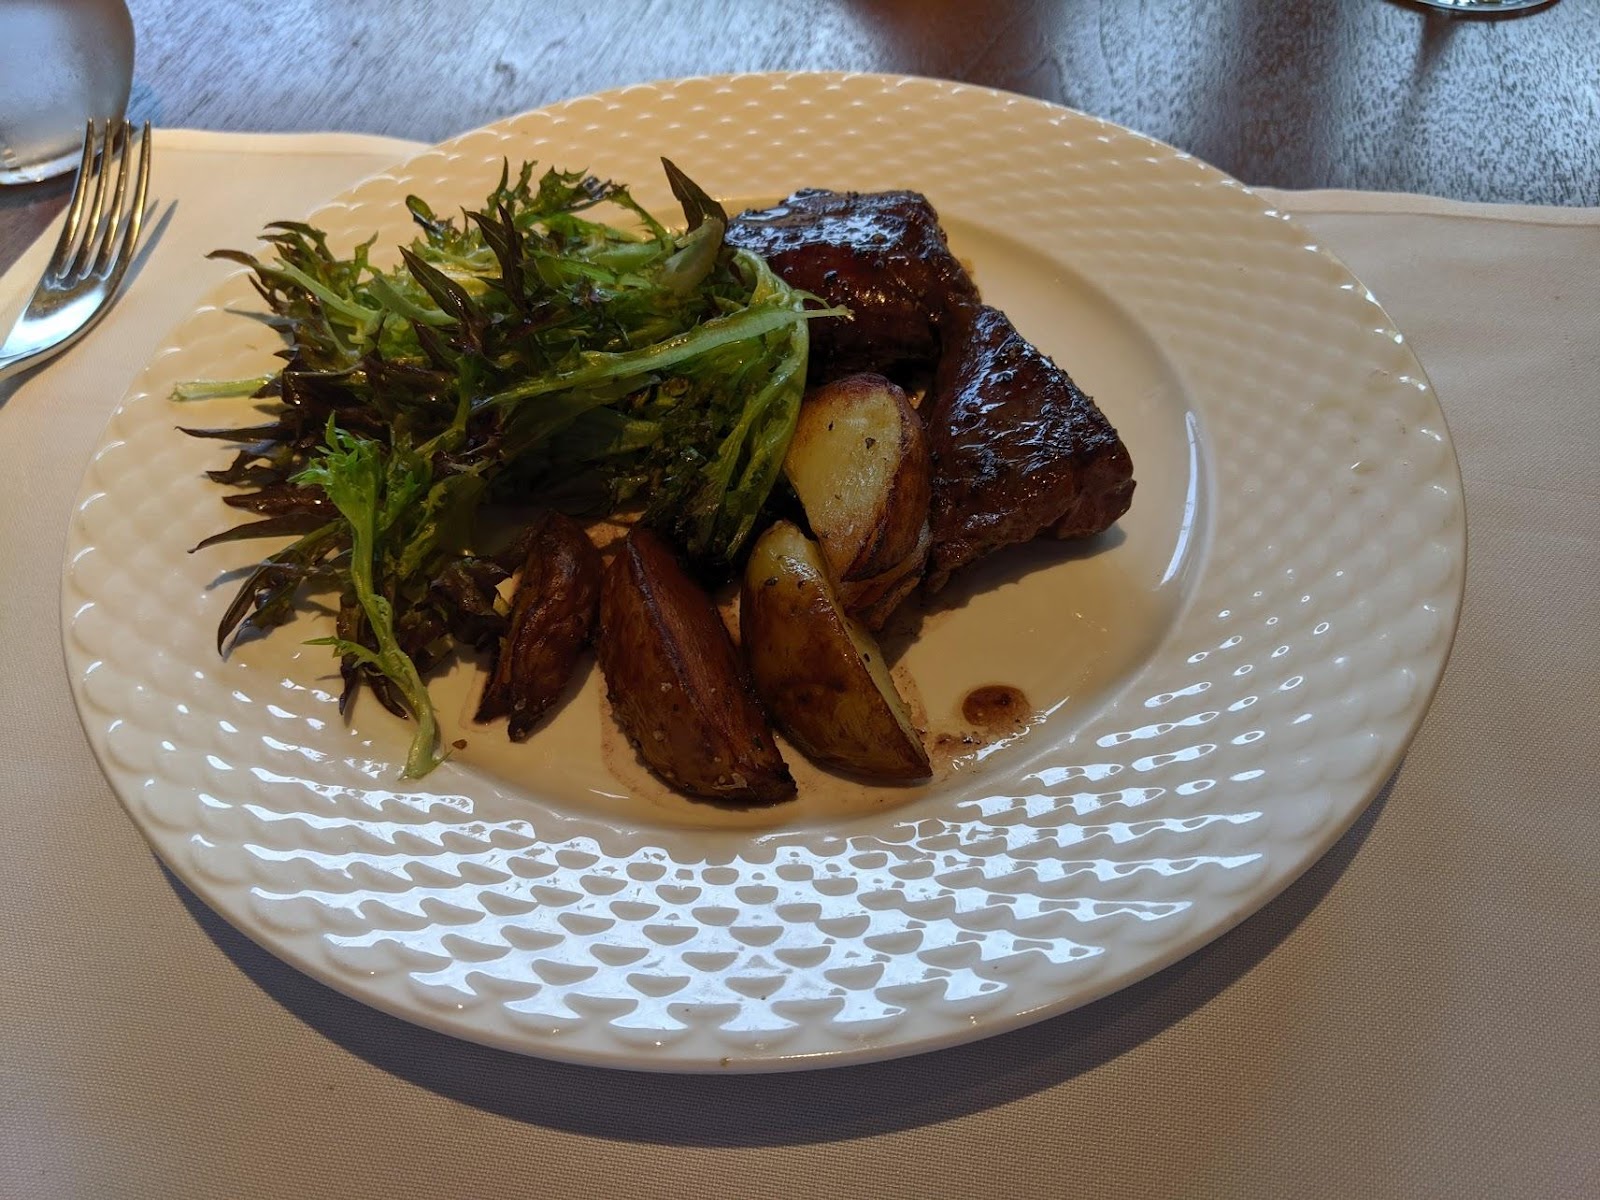 hanger steak with red wine butter, rosemary potatoes, leaf salad and mustard vinaigrette